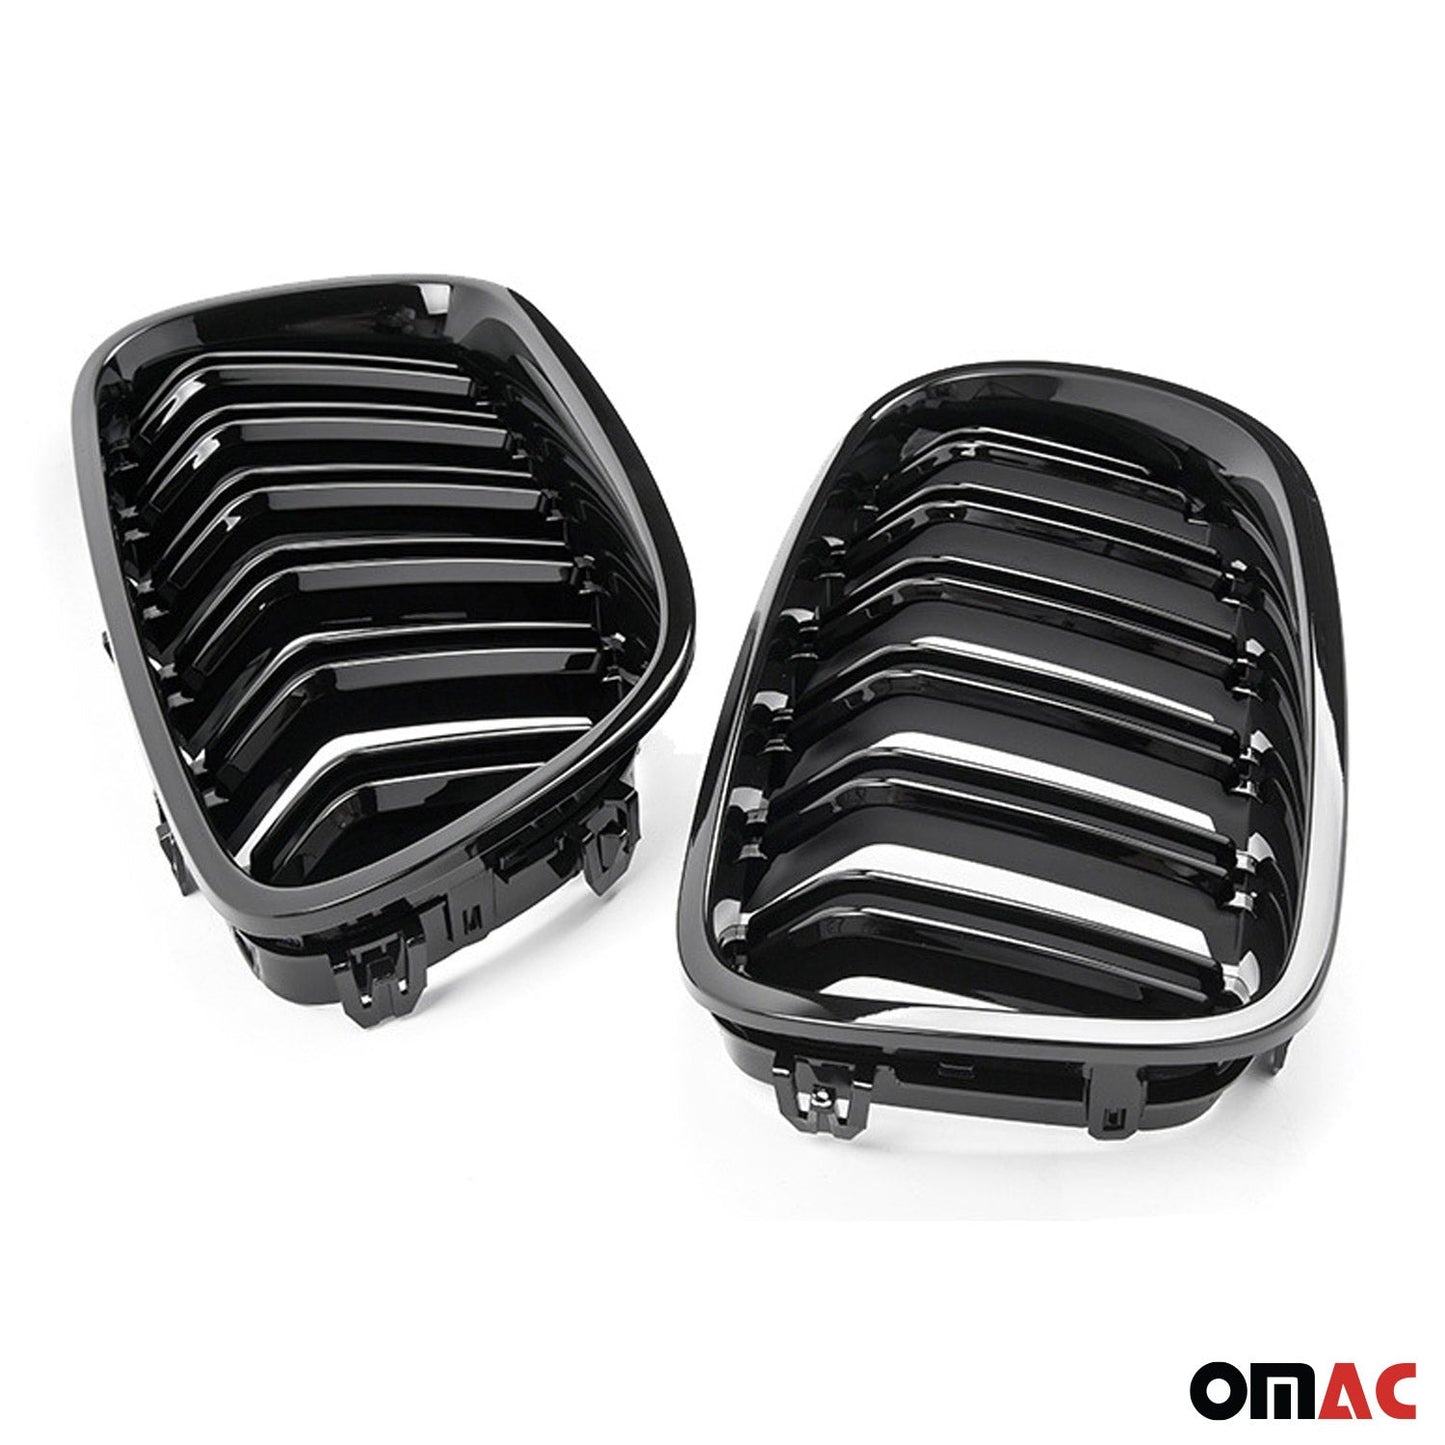 OMAC For BMW 5 Series F10 F11 M5 2010-2016 Front Kidney Grille M5 Style Gloss Black 1218P081MPB